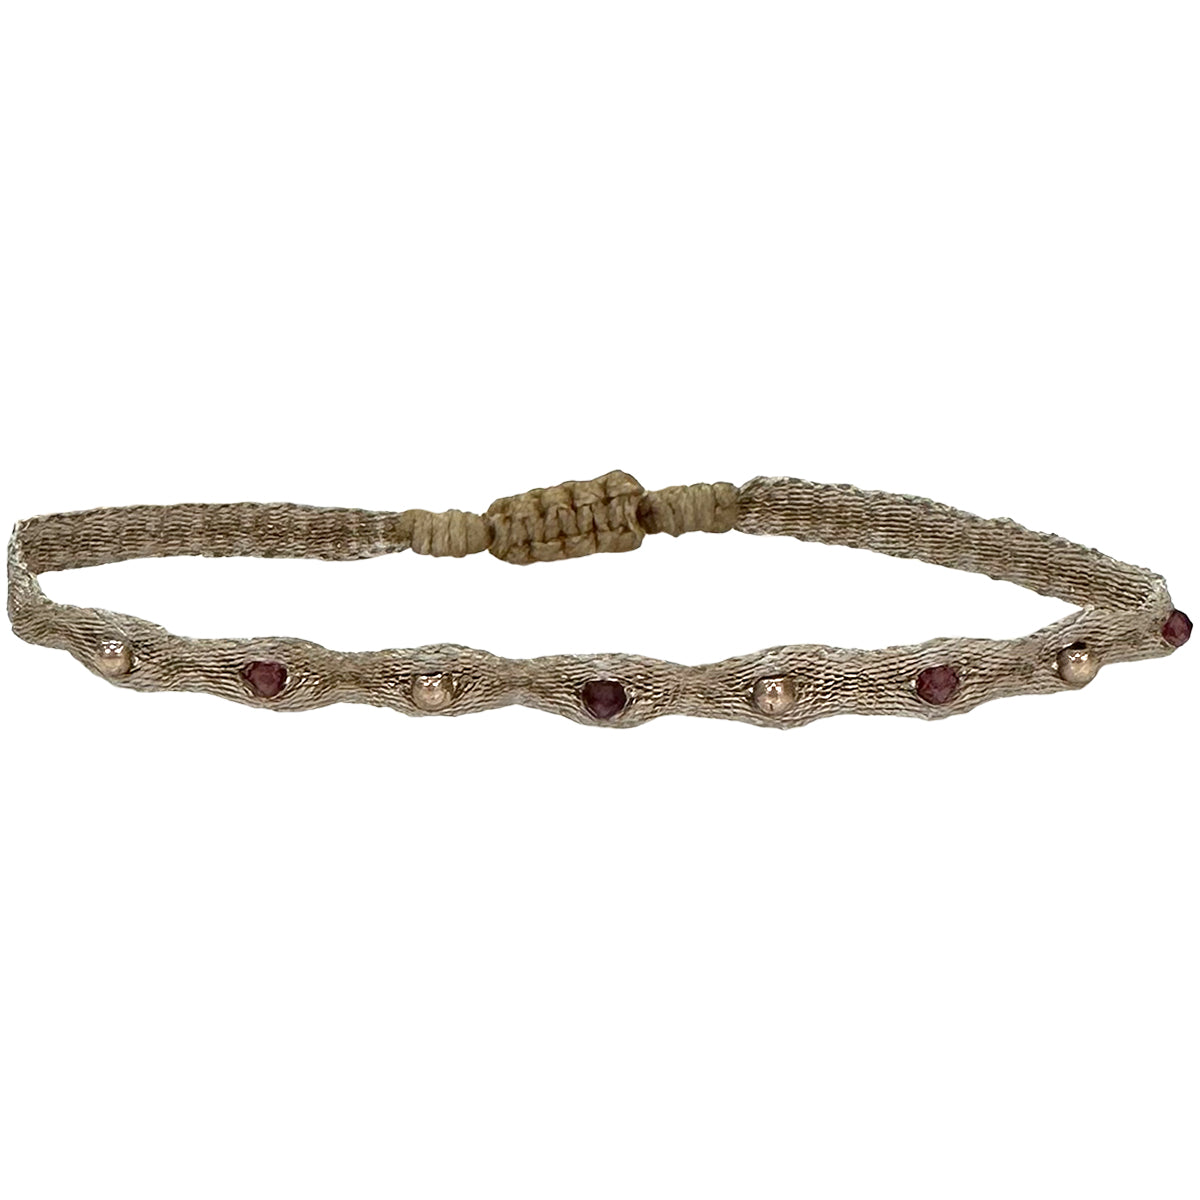 HANDMADE LIMA BRACELET WITH GRANITE STONE AND ROSE GOLD DETAILS